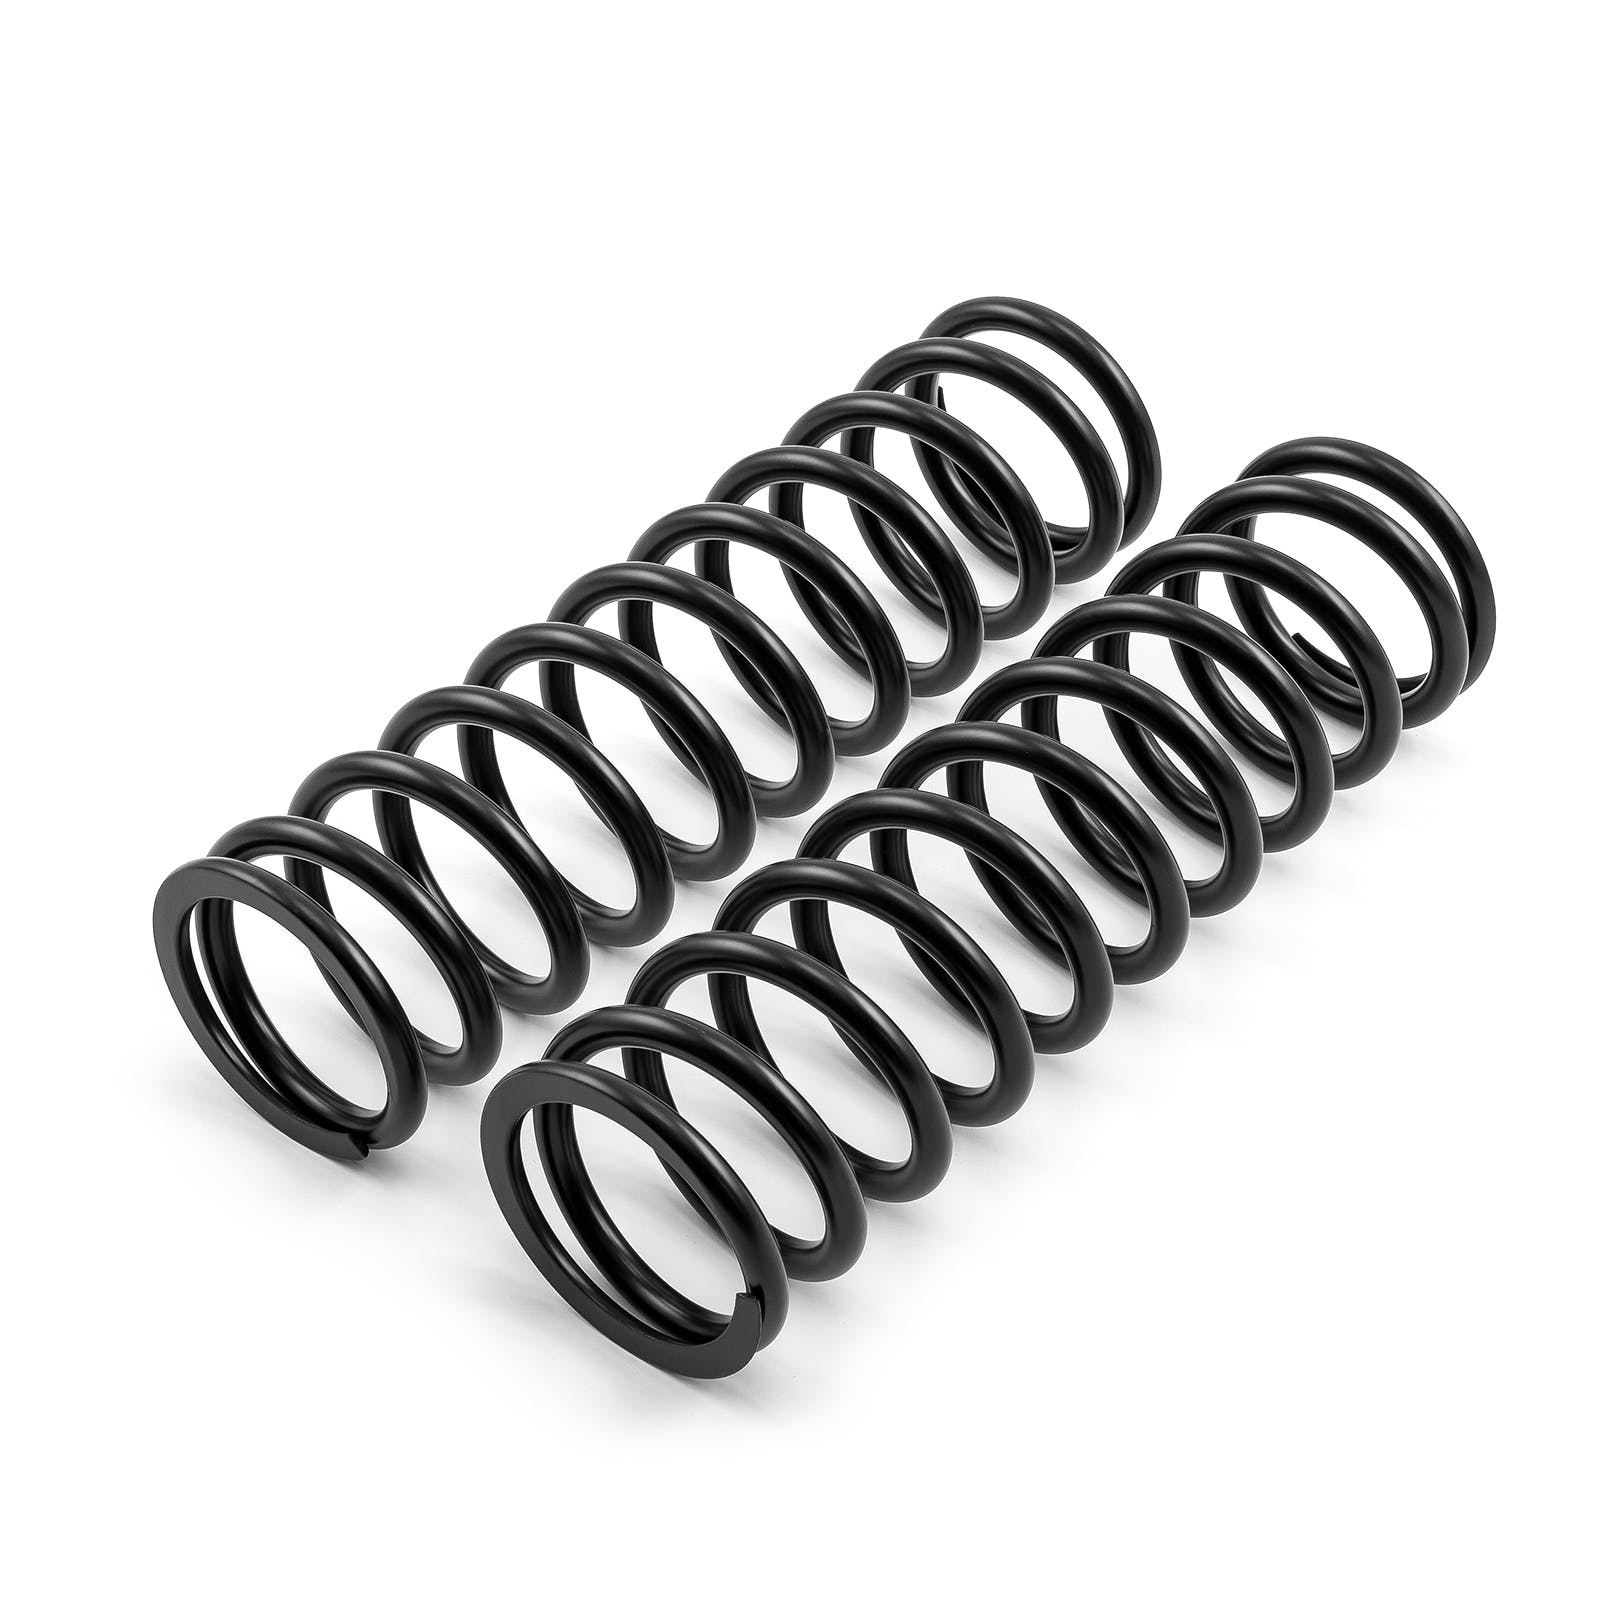 Speedmaster PCE493.1003.02 150 lbs./in. Spring Rate 12 Tall Coil Over Shock Springs - Black (Pair)